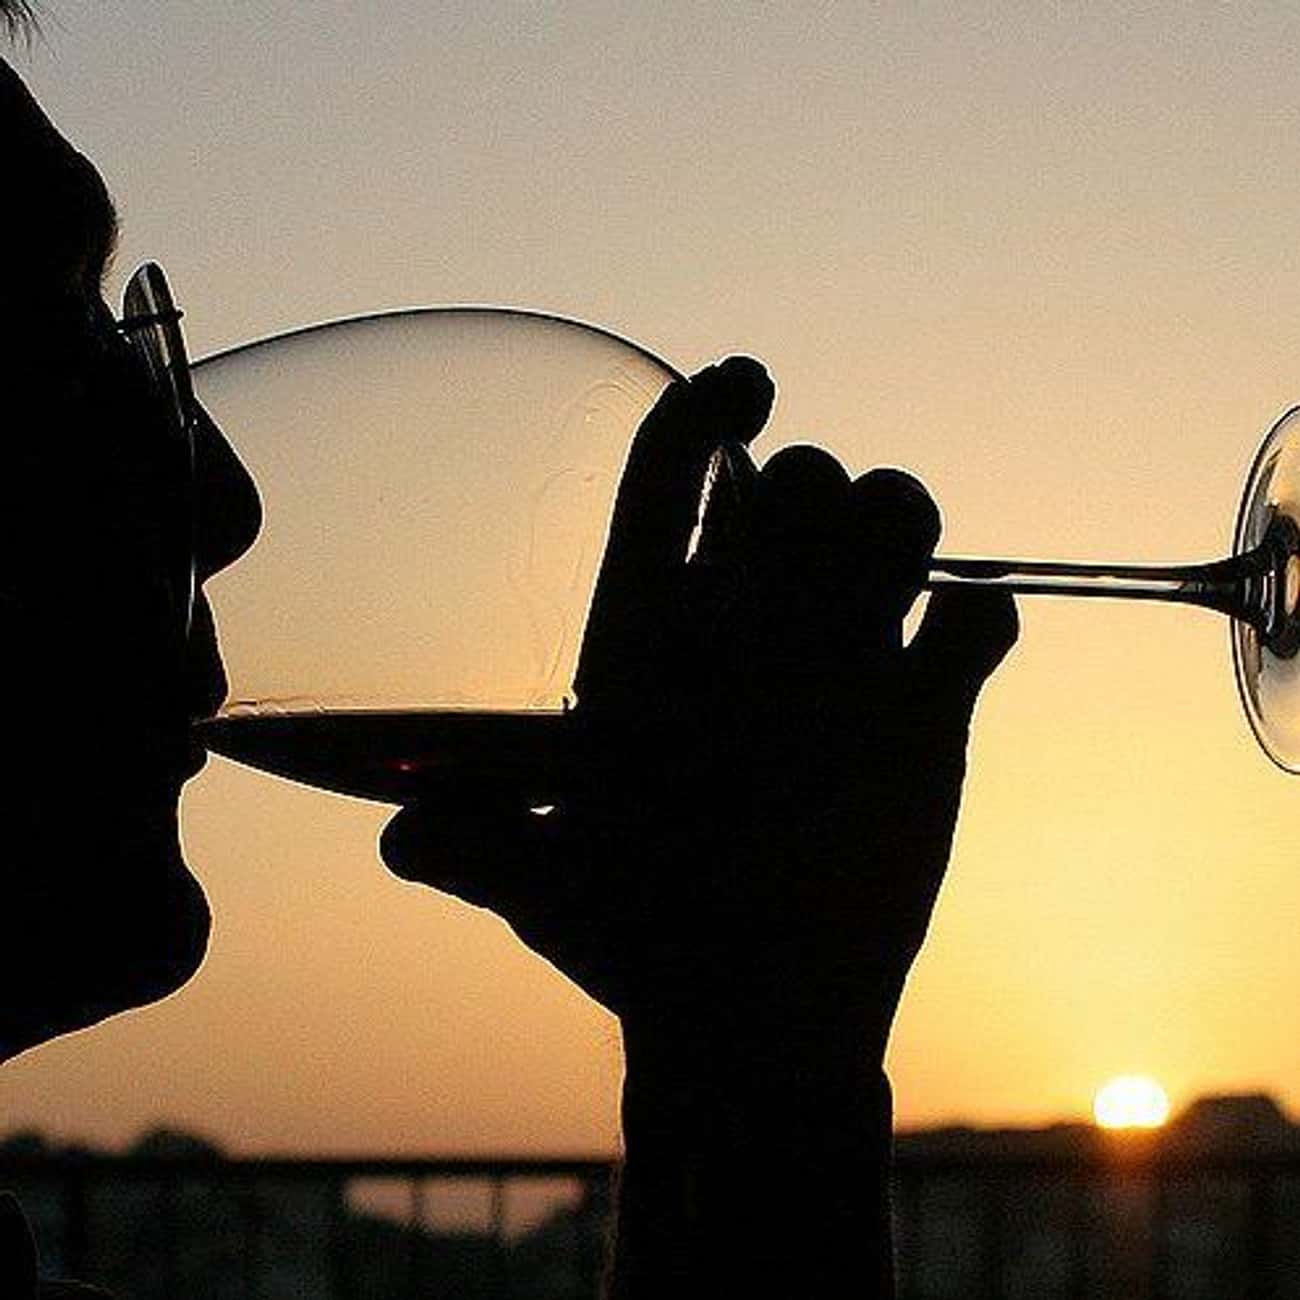 Drinking Wine in Moderation Can Make You Smarter